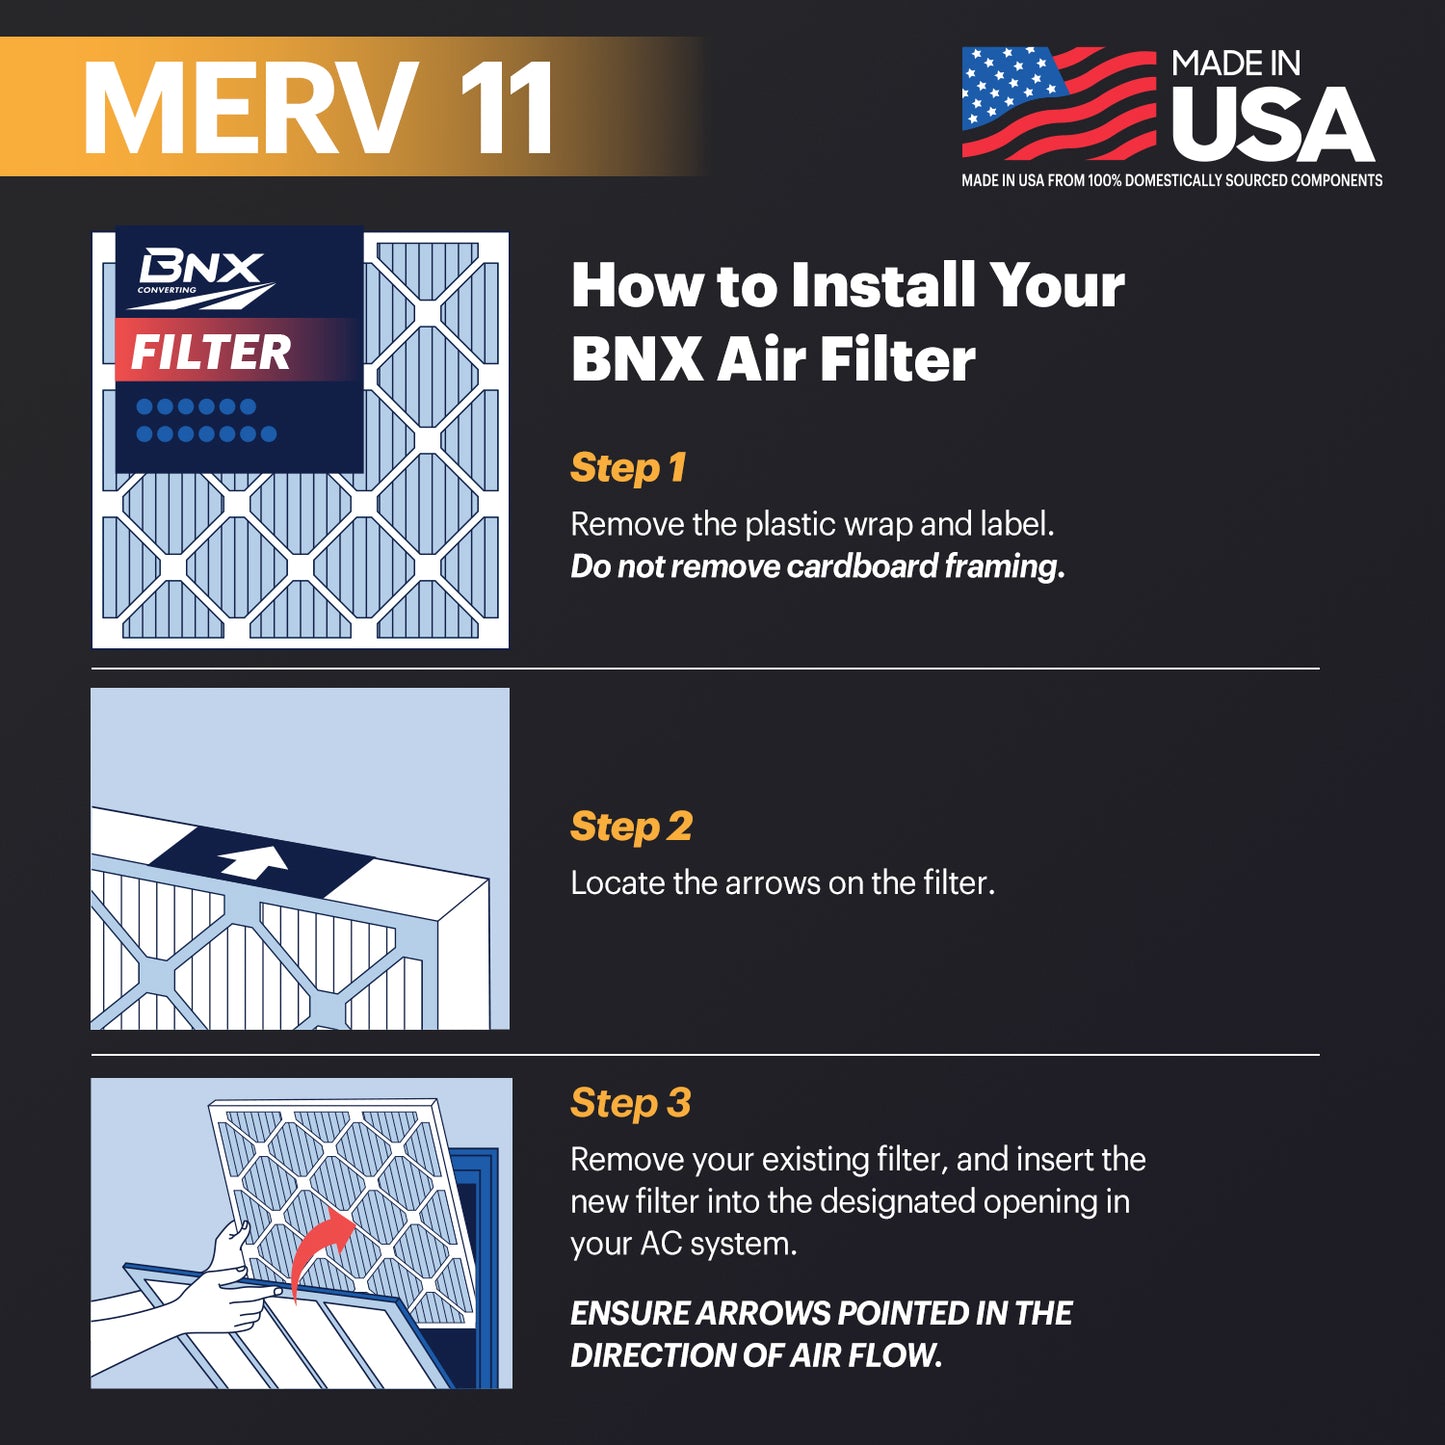 BNX 20x25x1 MERV 11 Air Filter 8 Pack - MADE IN USA - Electrostatic Pleated Air Conditioner HVAC AC Furnace Filters - Removes Dust, Mold, Pollen, Lint, Pet Dander, Smoke, Smog